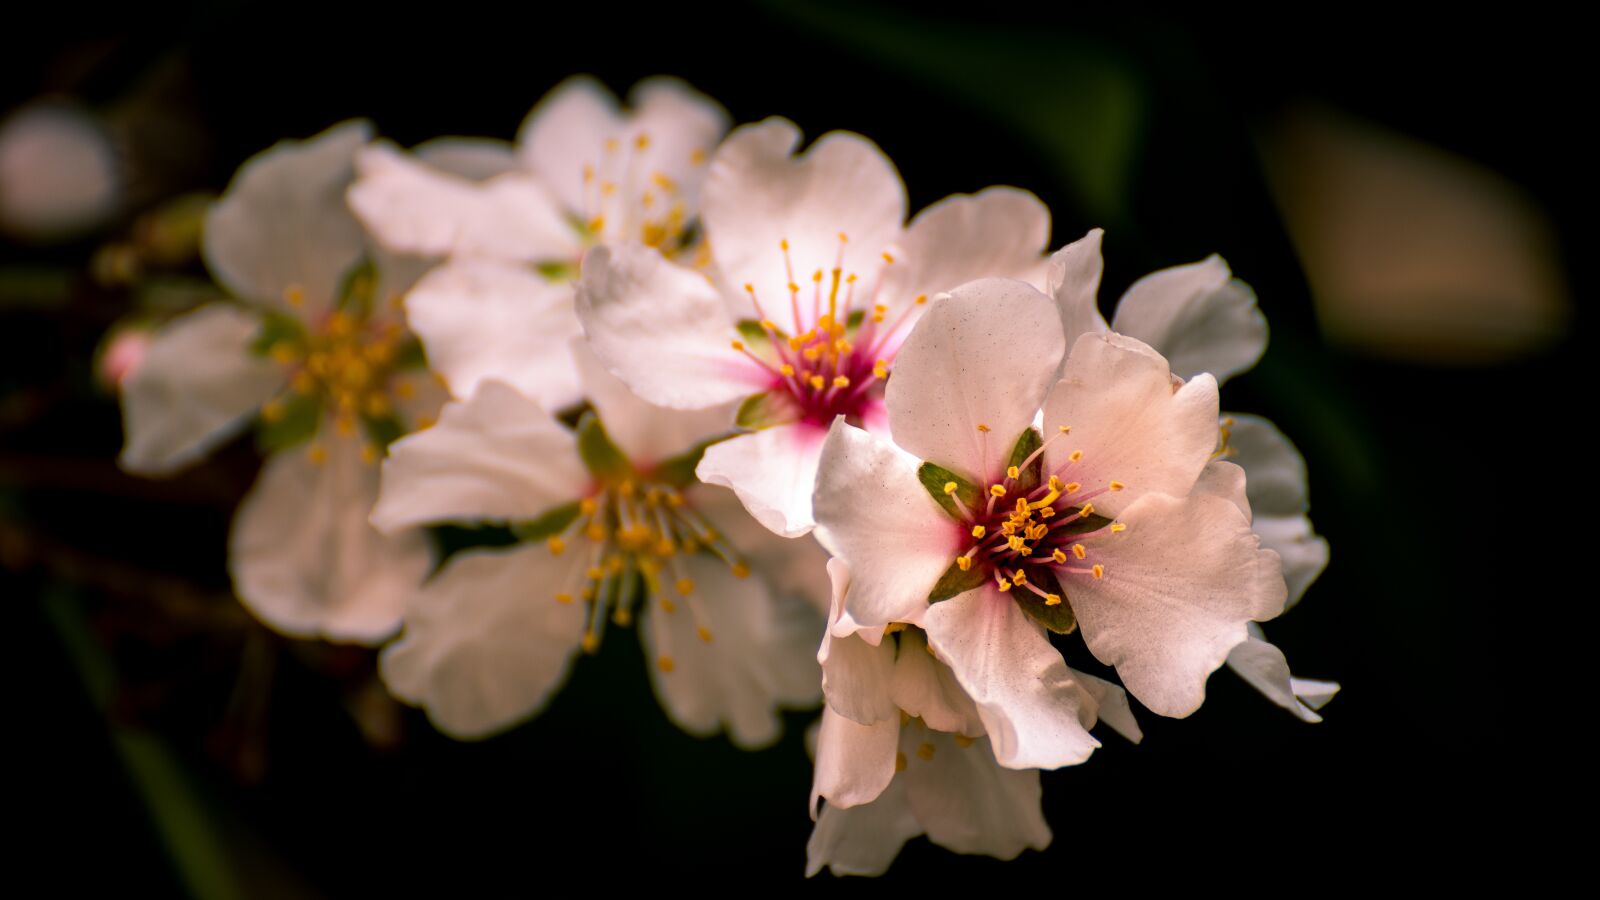 Sony a6500 sample photo. Flower, almond tree, plant photography